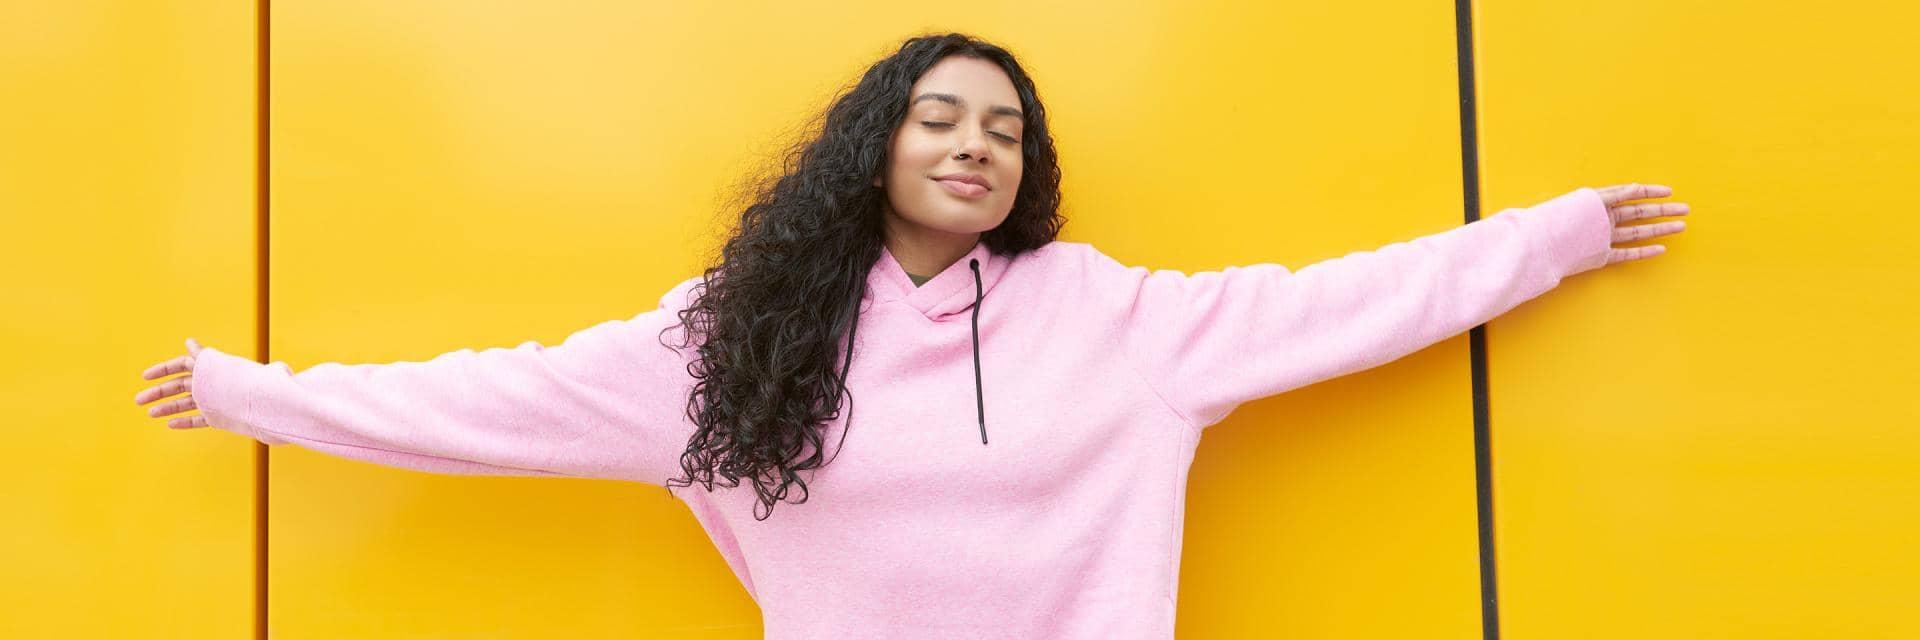 Young woman wearing a pink sweatshirt with her arms outstretched in front of a yellow wall